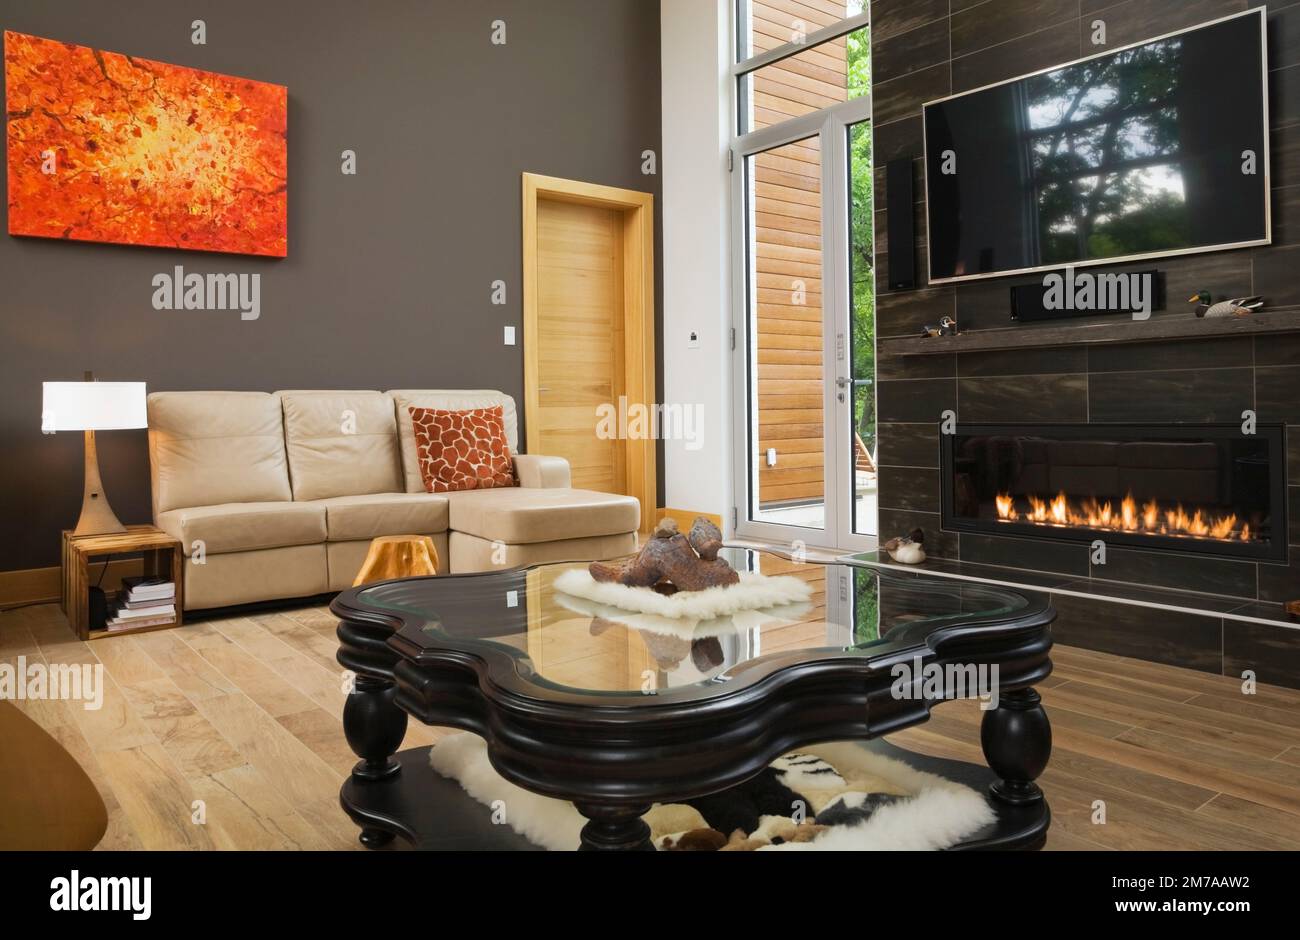 Tan leather sofa and black wooden glass top coffee table with lit gas fireplace in living room inside modern cubist style home. Stock Photo